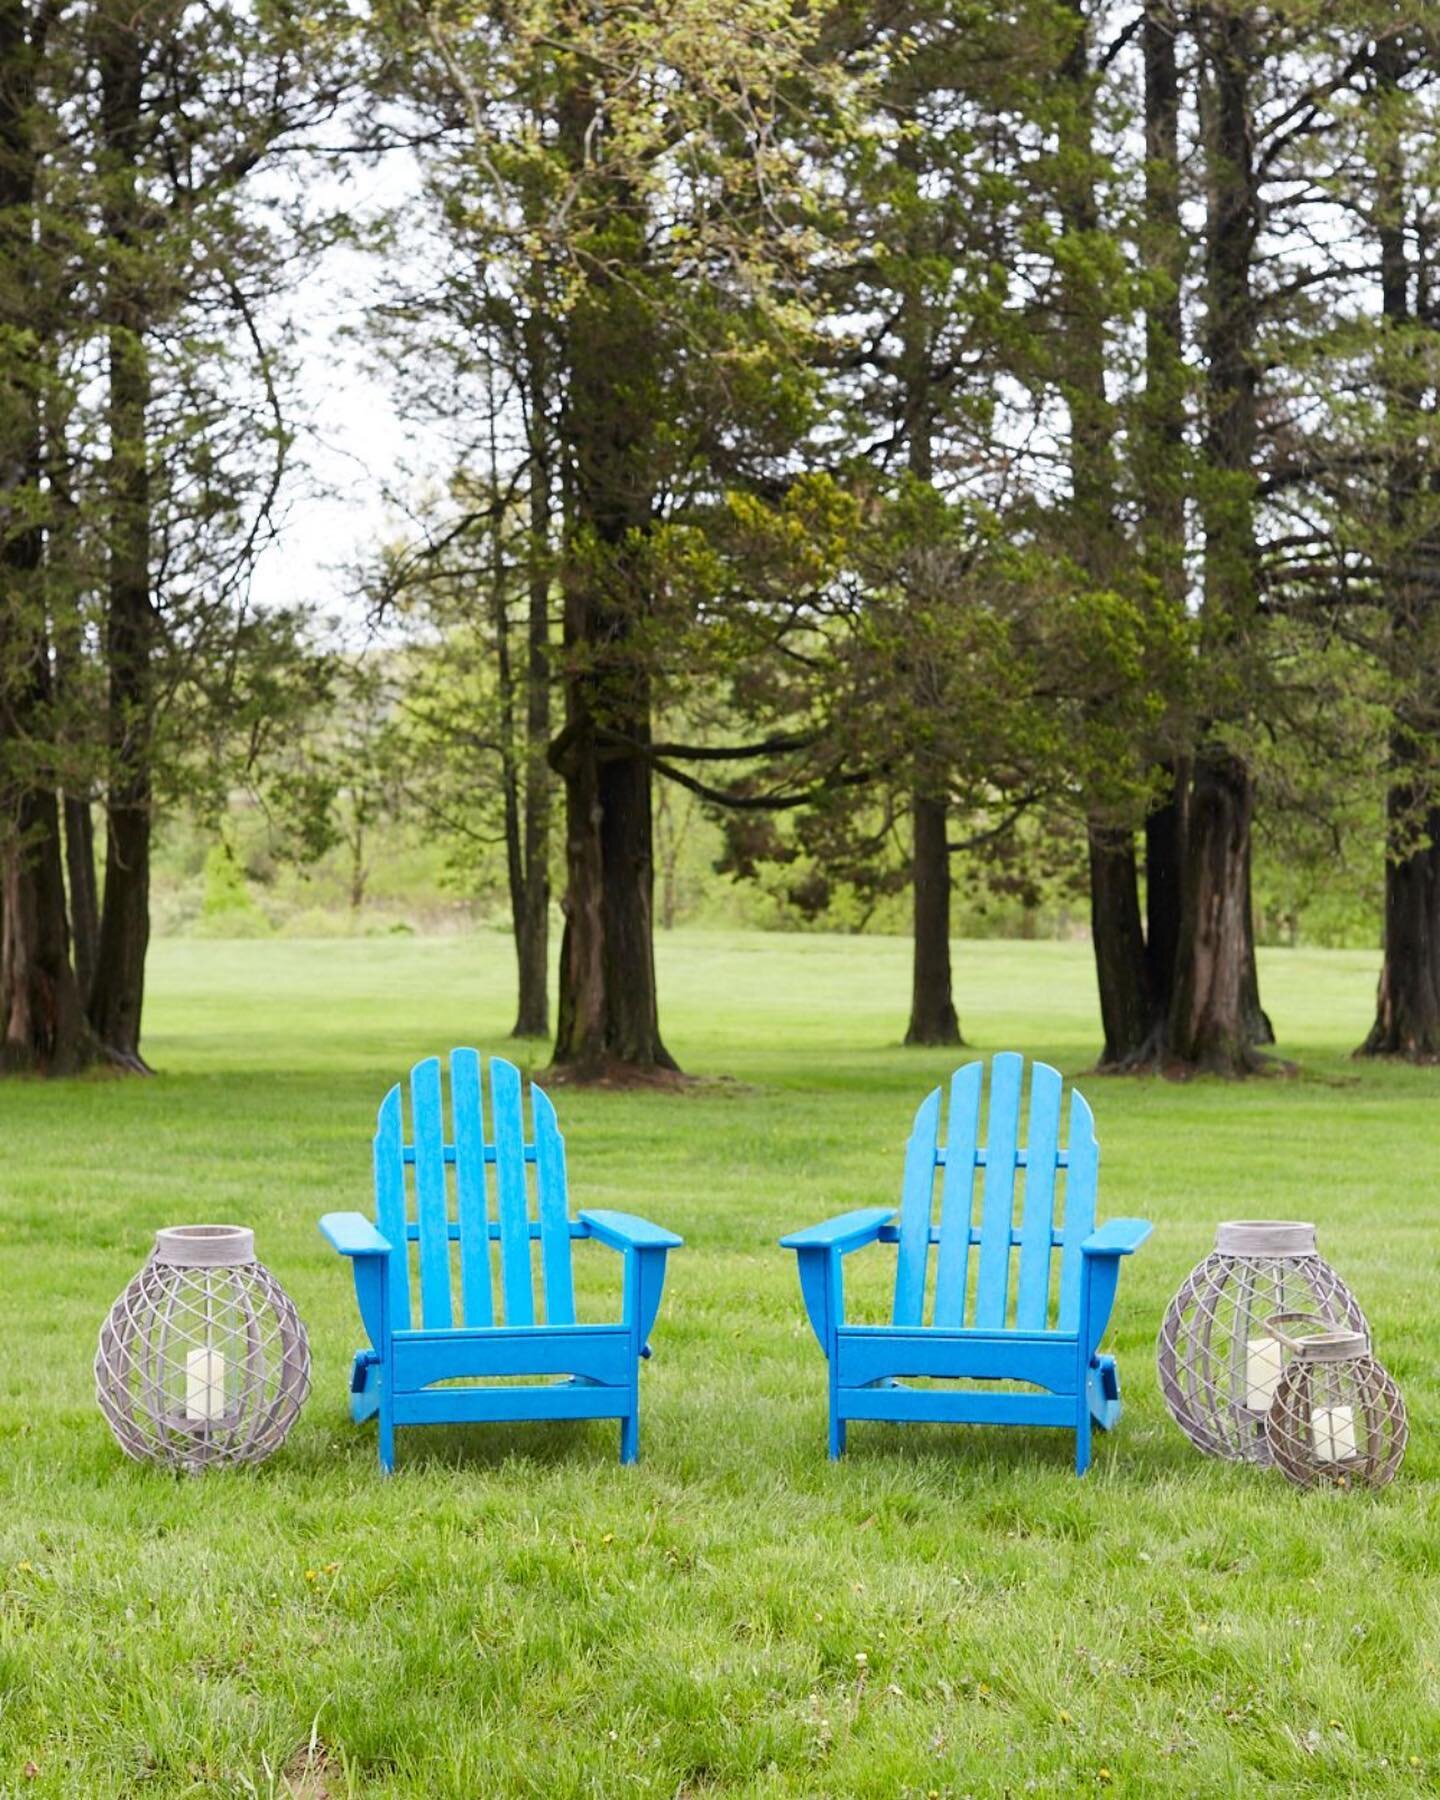 Pick a friend&hellip;any friend. Relax in one of our #polywood Adirondack chairs. #madeintheusa

#sustainability #madeinamerica #recycling #outdoorfurniture #patiofurniture #adirondacks #summertime #shopnepa #dundeegardens #shopsmall #smallbusiness